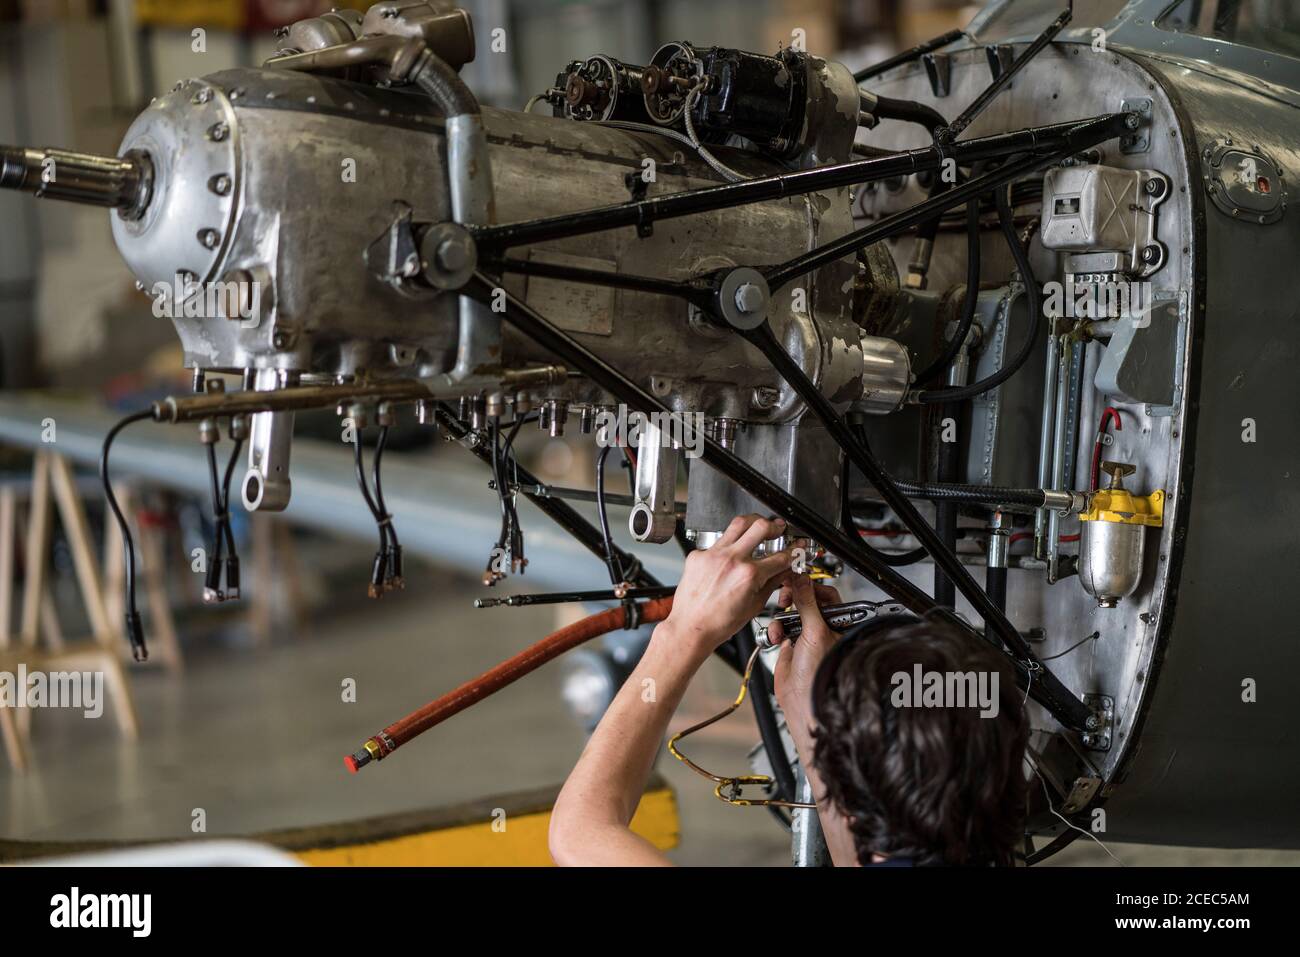 Crop hands of aircraft mechanic fixing engine of small airplane in hangar Stock Photo